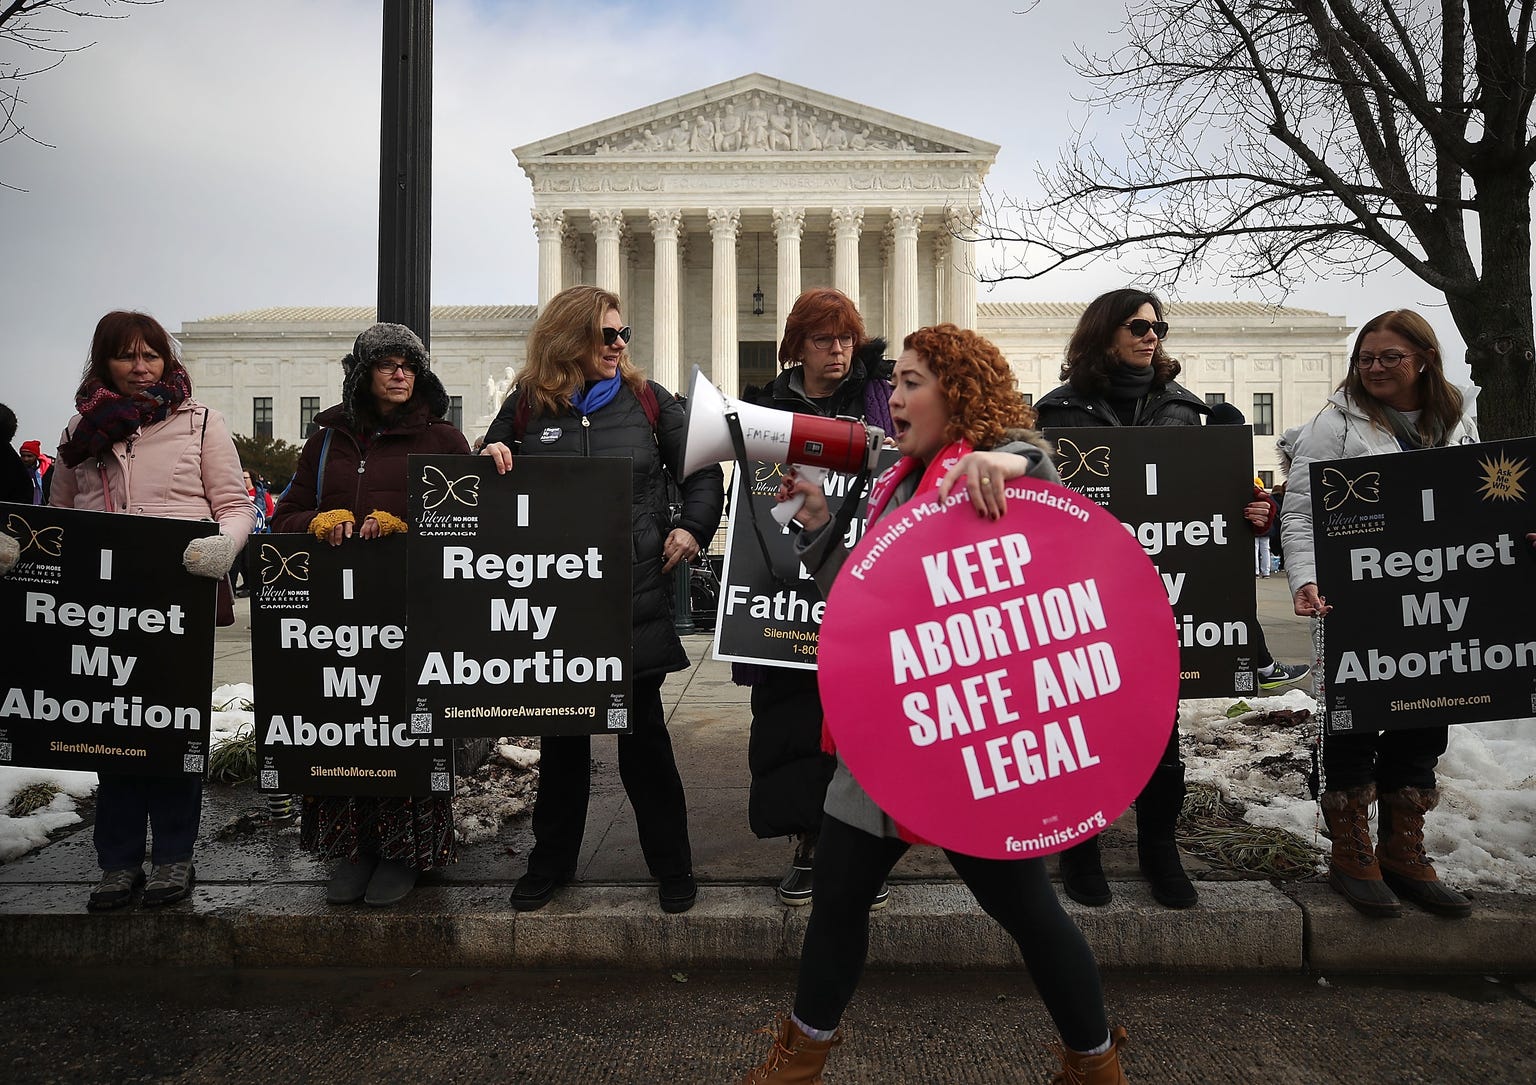 Abortion law map 'Roe v. Wade' made it legal, but 43 states limit it